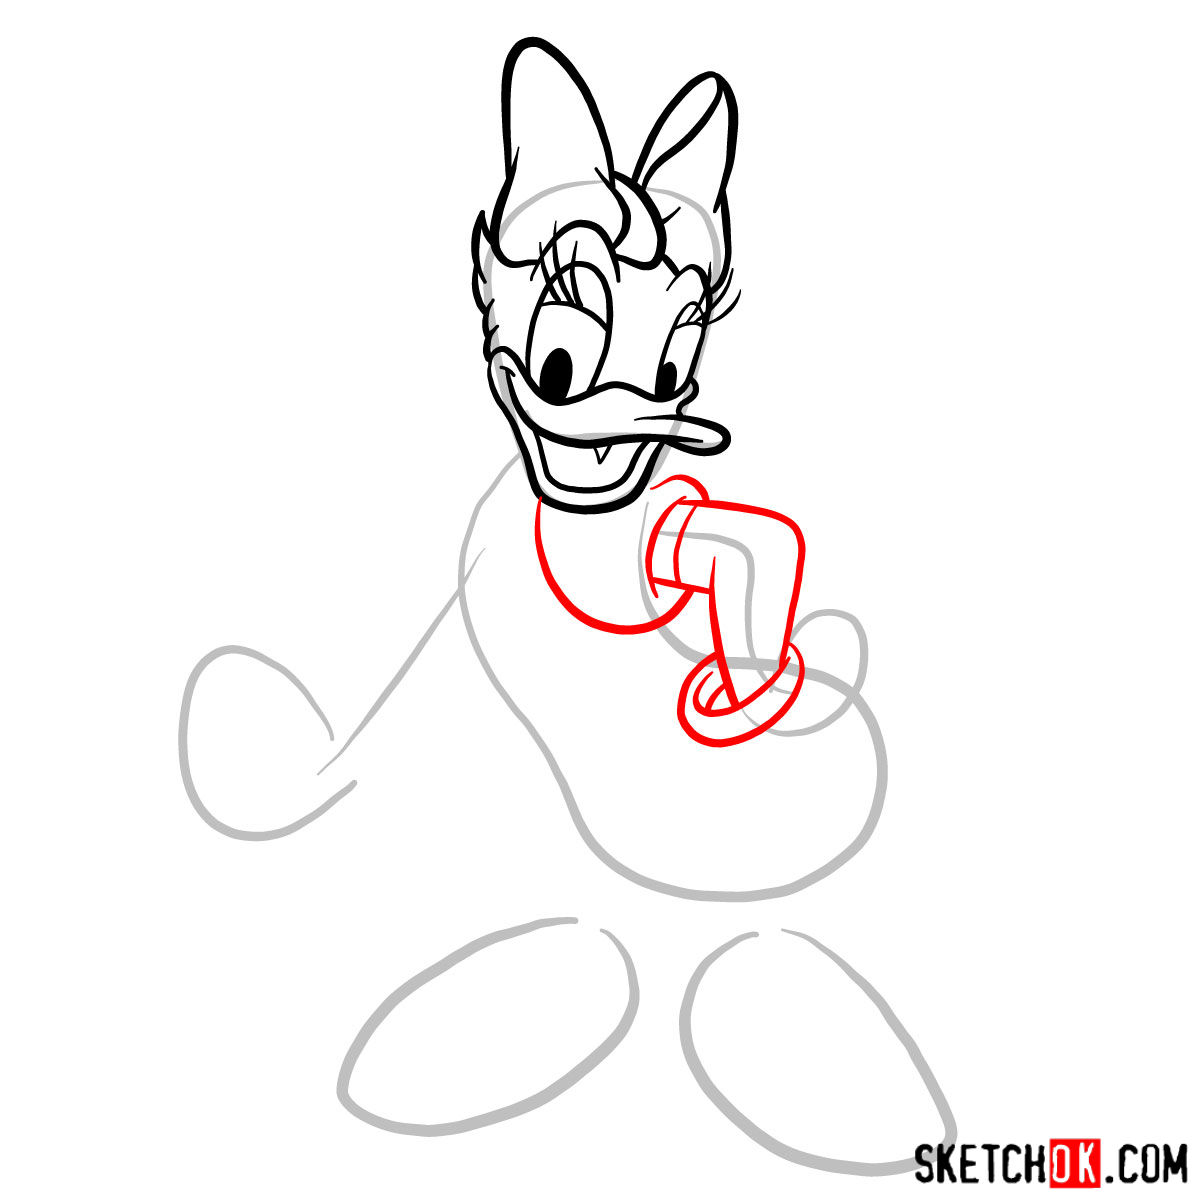 How to draw Daisy Duck - step 05